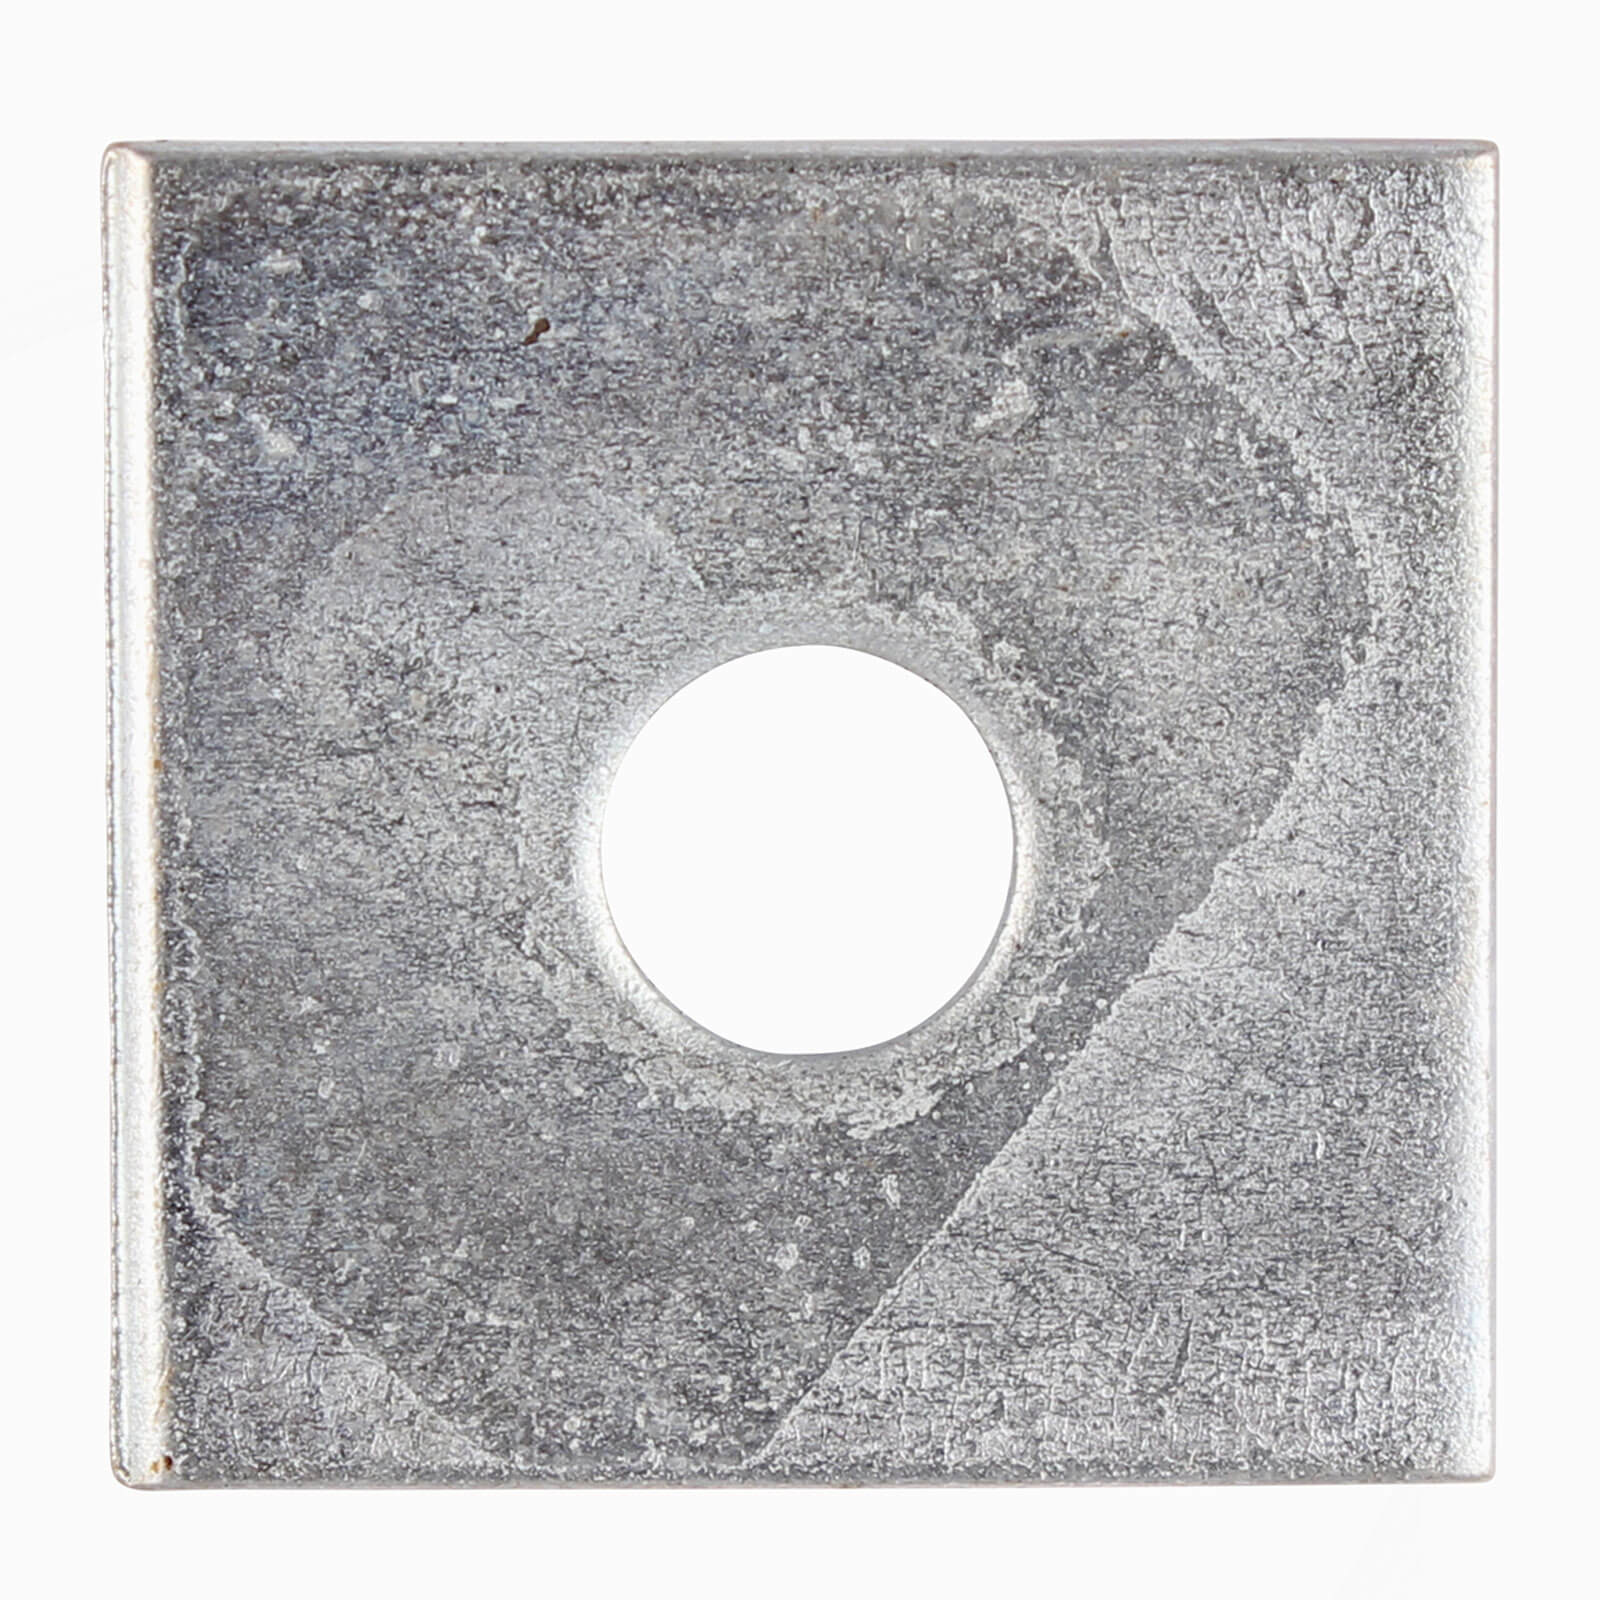 Image of Square Plate Washer Zinc Plated 12mm 50mm Pack of 2